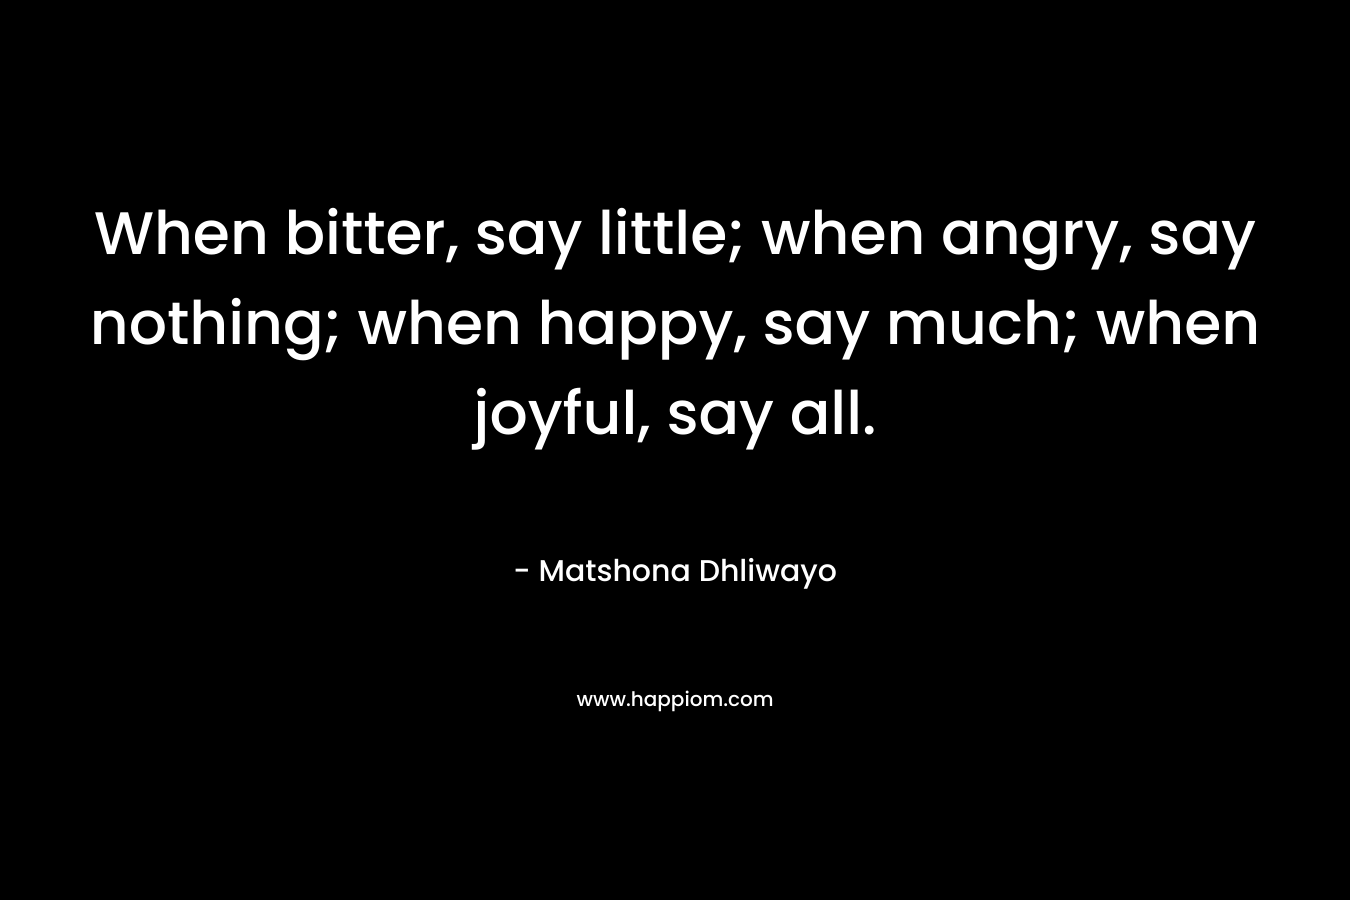 When bitter, say little; when angry, say nothing; when happy, say much; when joyful, say all.